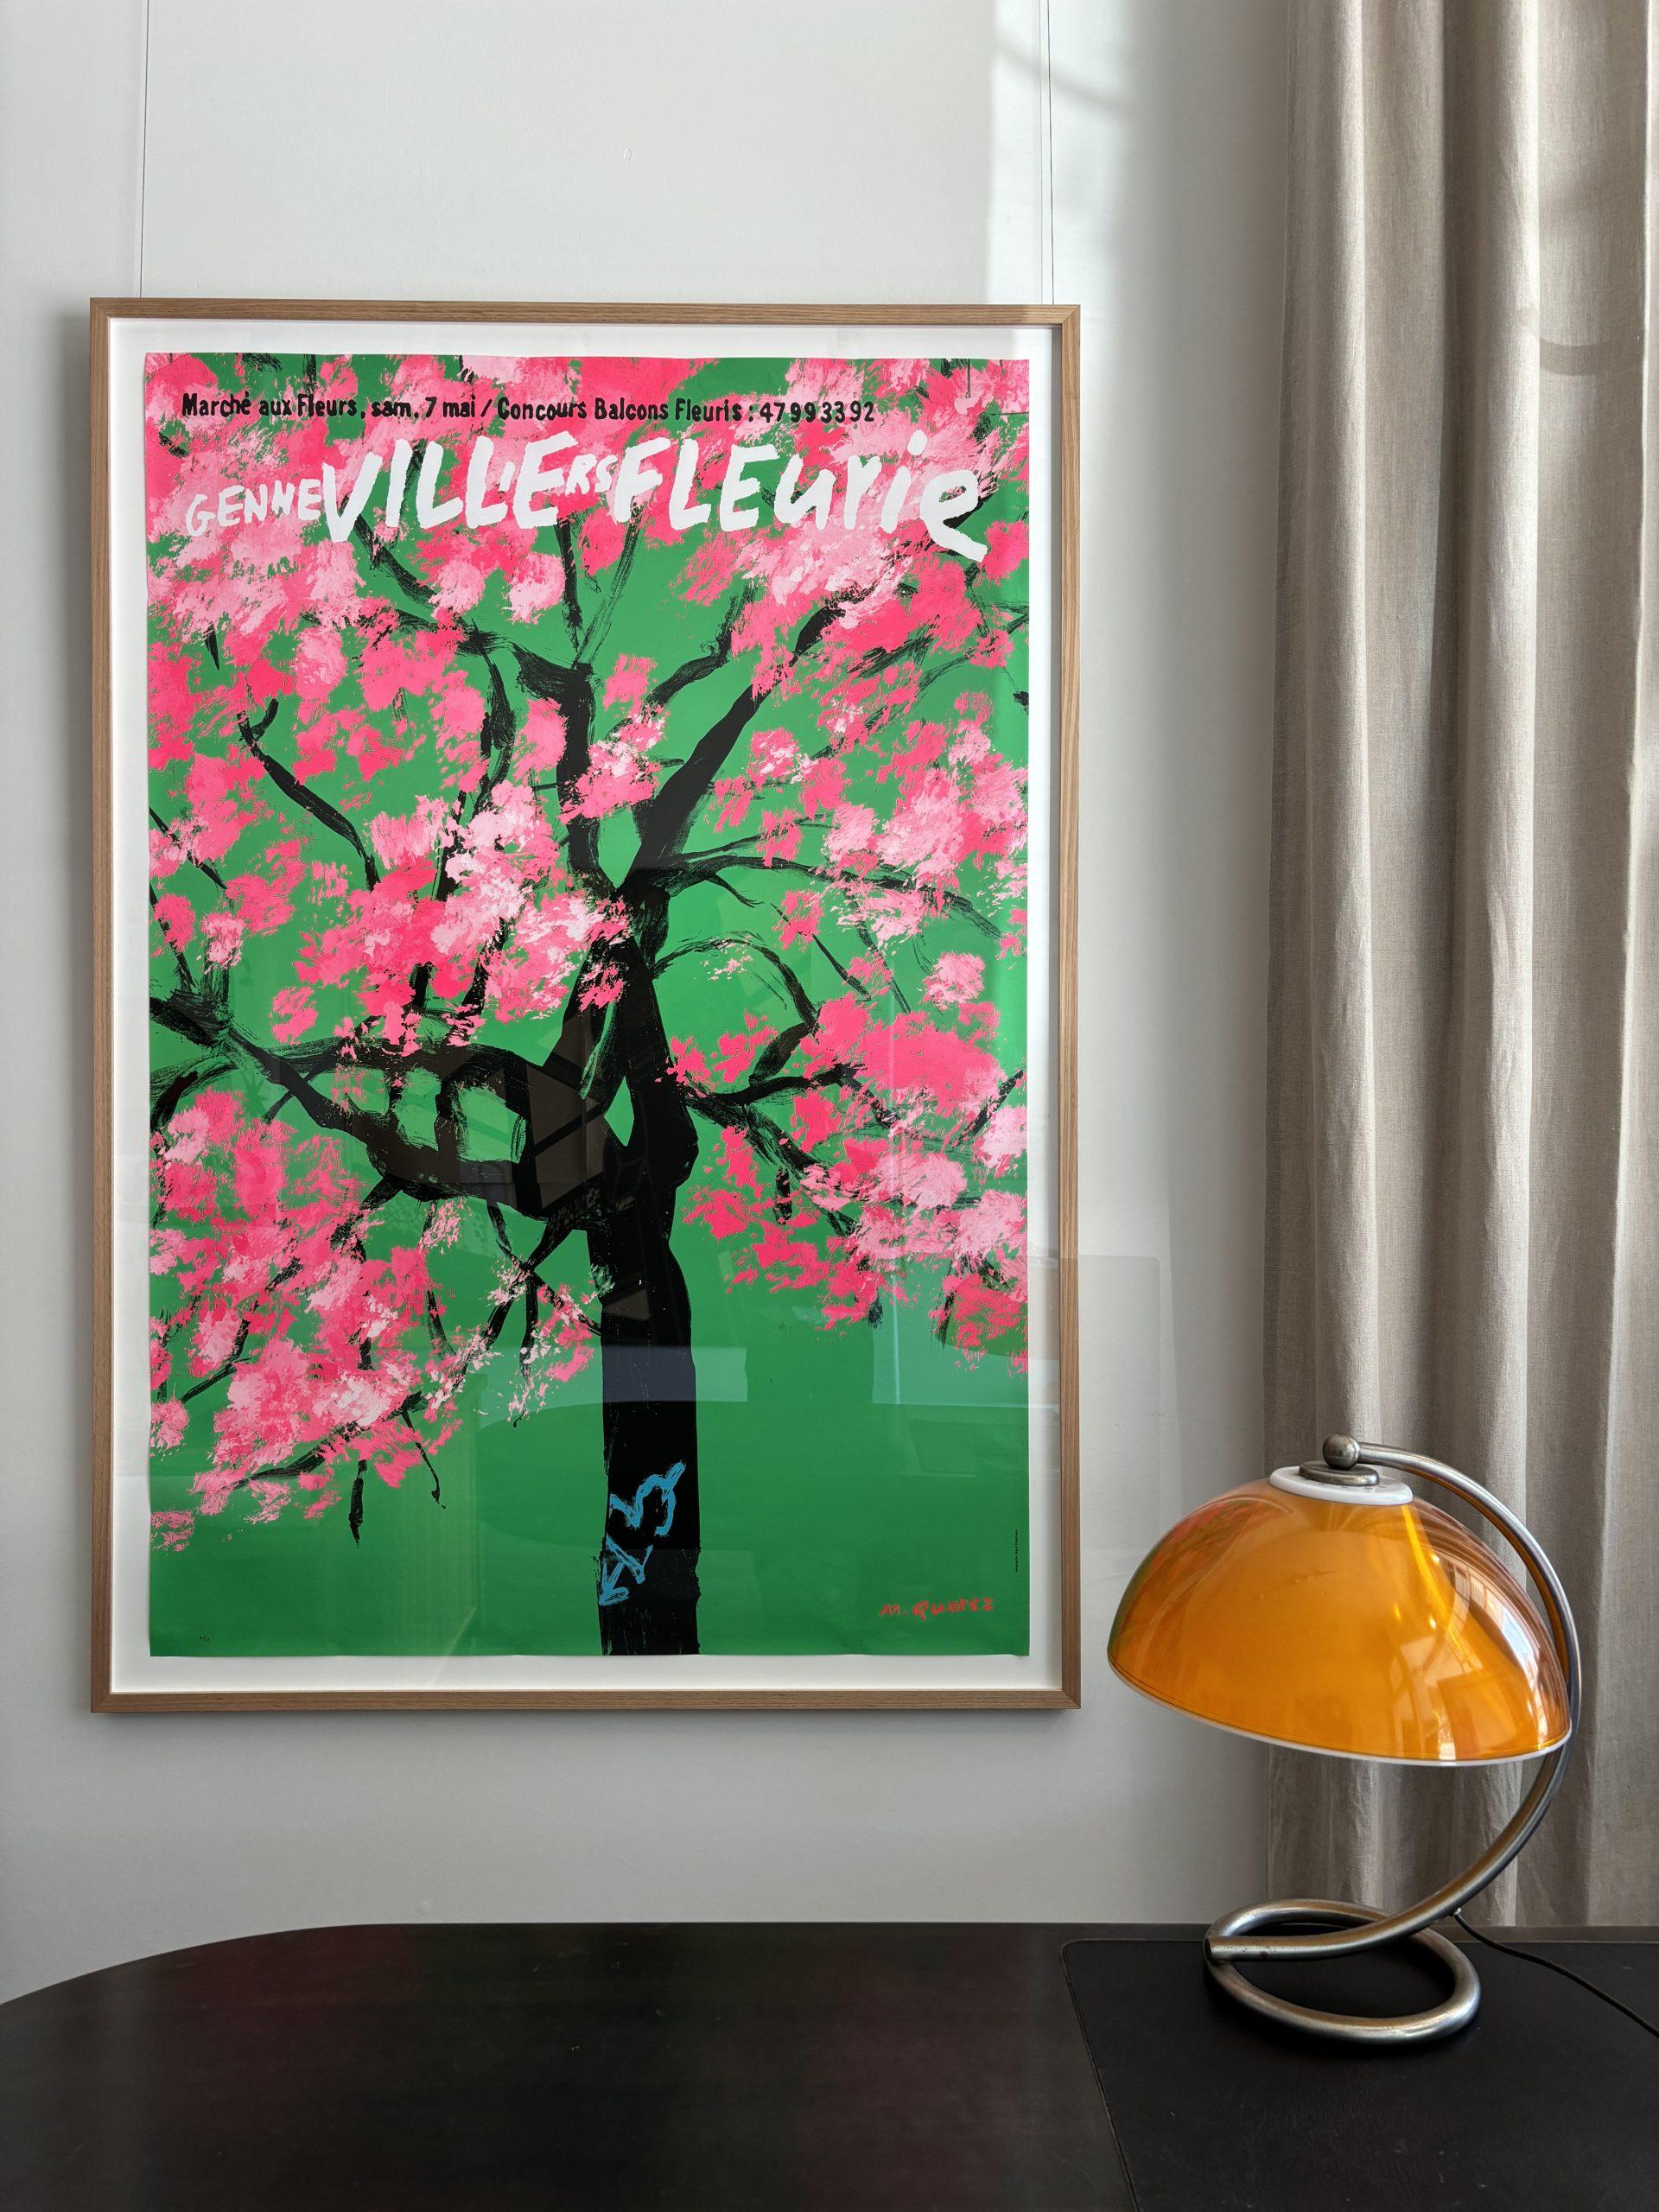 QUAREZ LIMITED EDITION MARCHE AUX FLEURS

Letitia Morris Gallery and the Quarez Estate have collaborated closely to offer its first limited edition poster! This is the first time both Letitia Morris Gallery and the Quarez Estate have come together